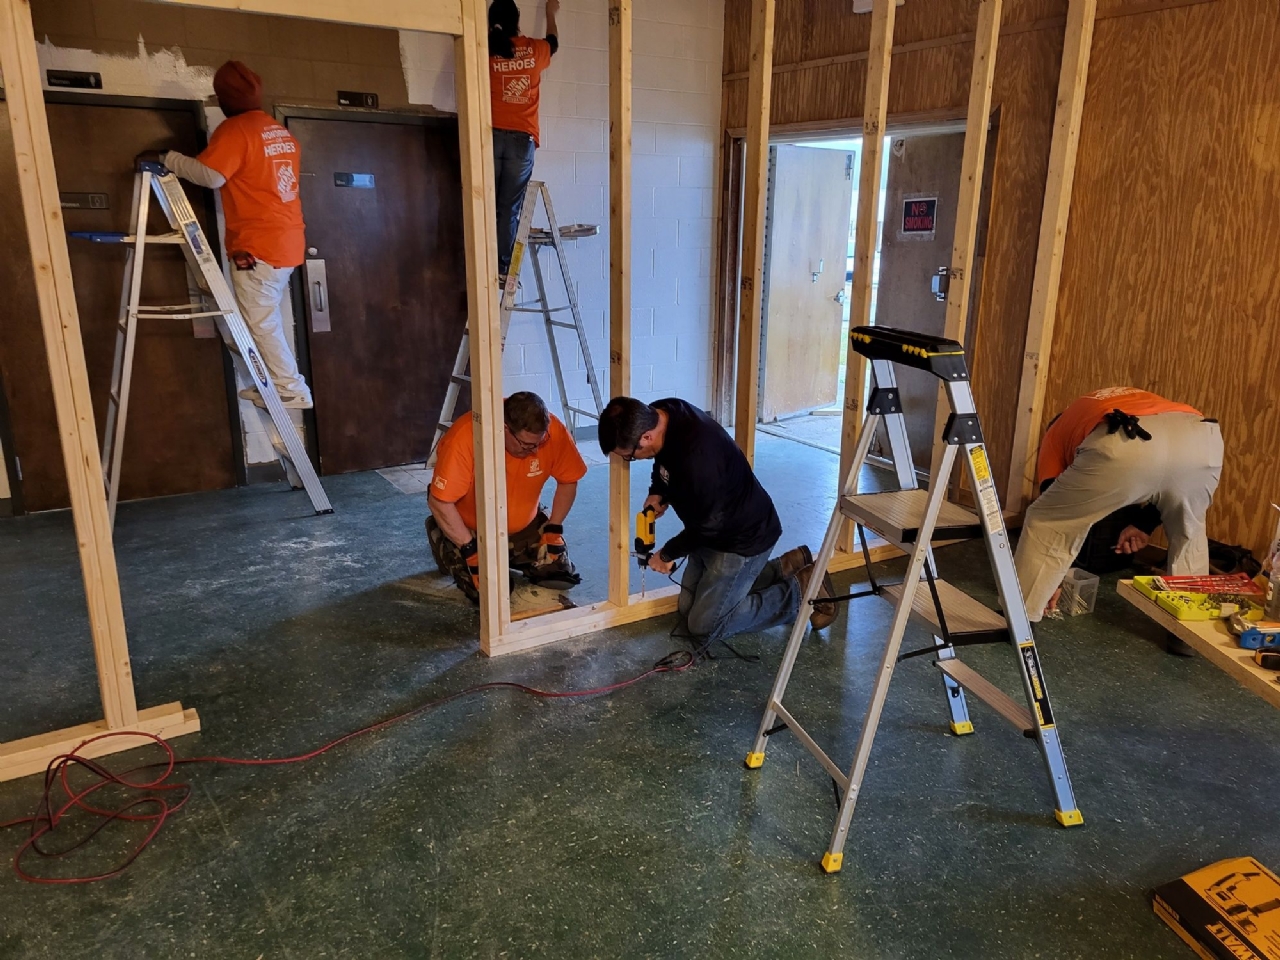 Home Depot donated supplies and labor in building a new room for the Auxiliary.